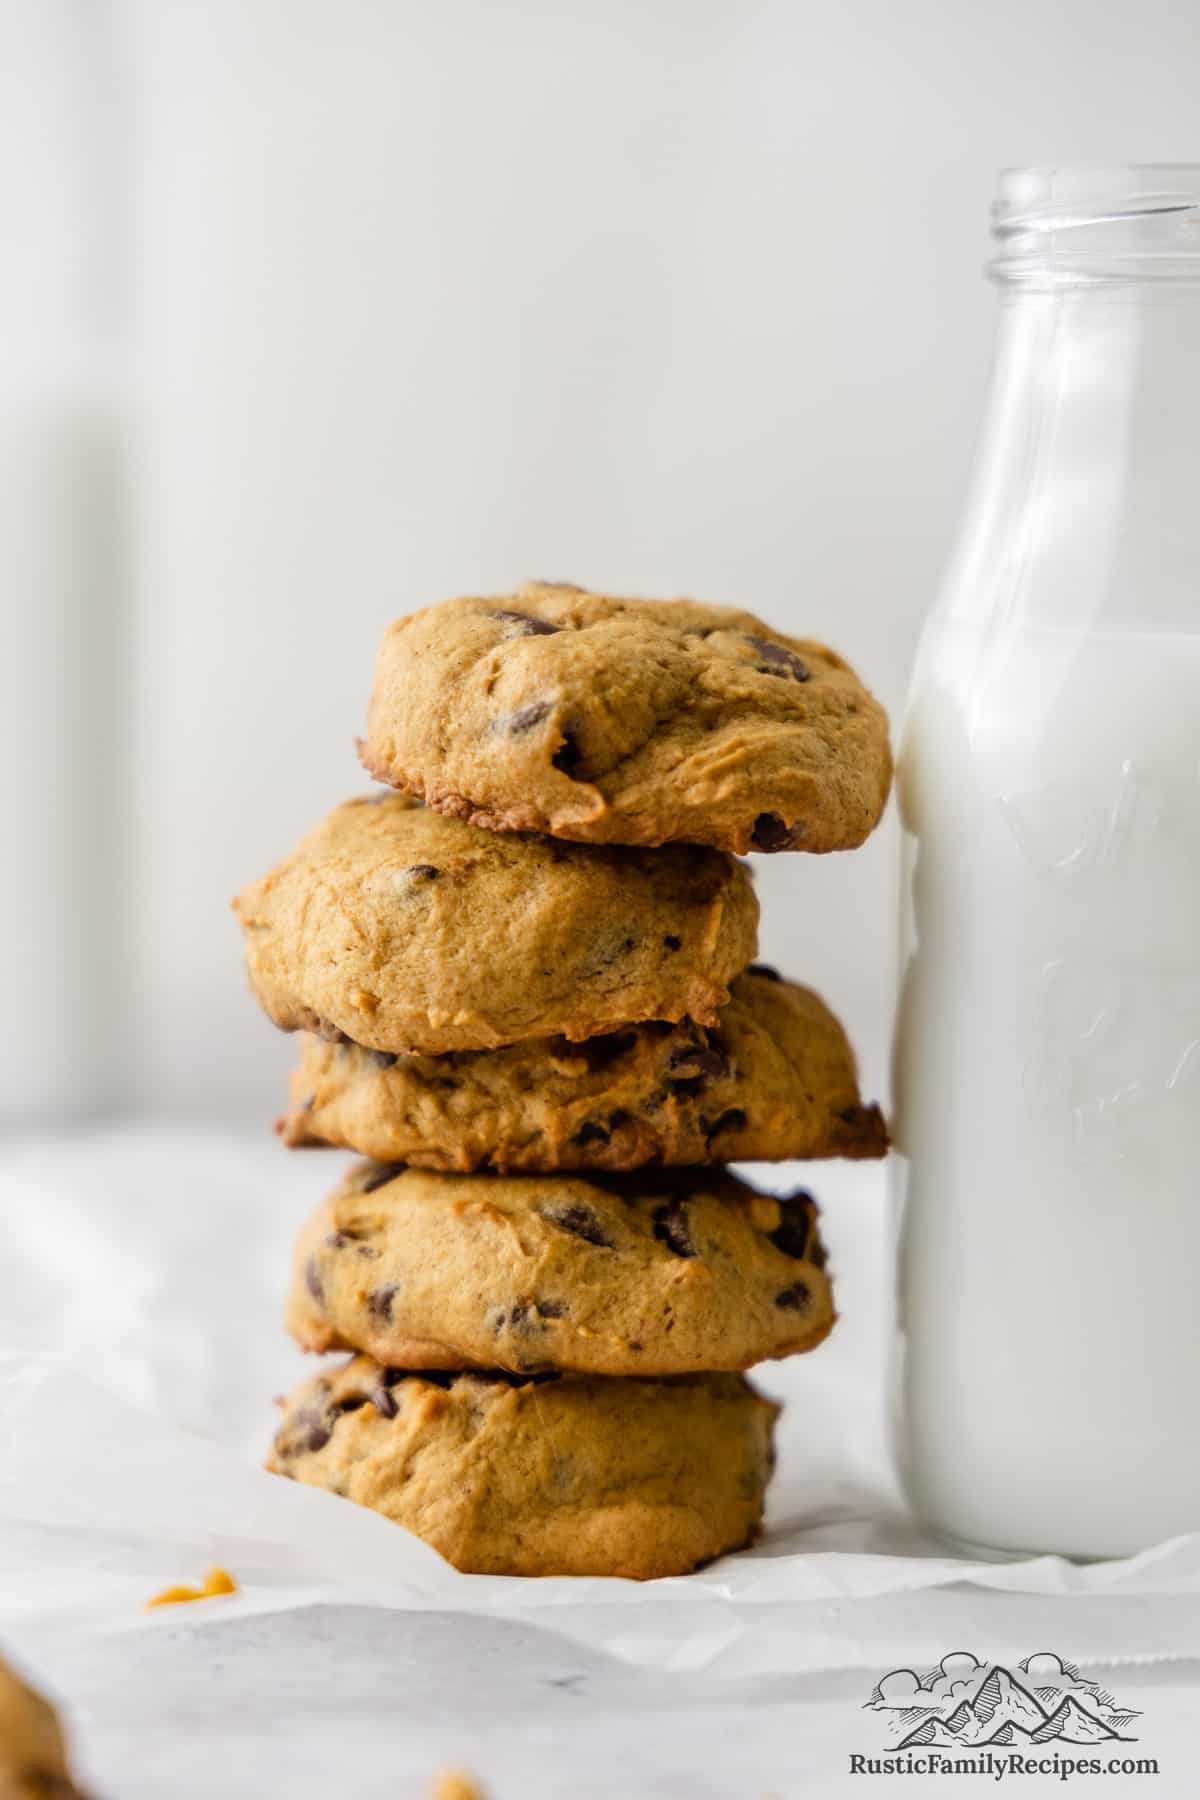 Pumpkin chocolate chip cookies stacked against a glass milk jug filled with milk.